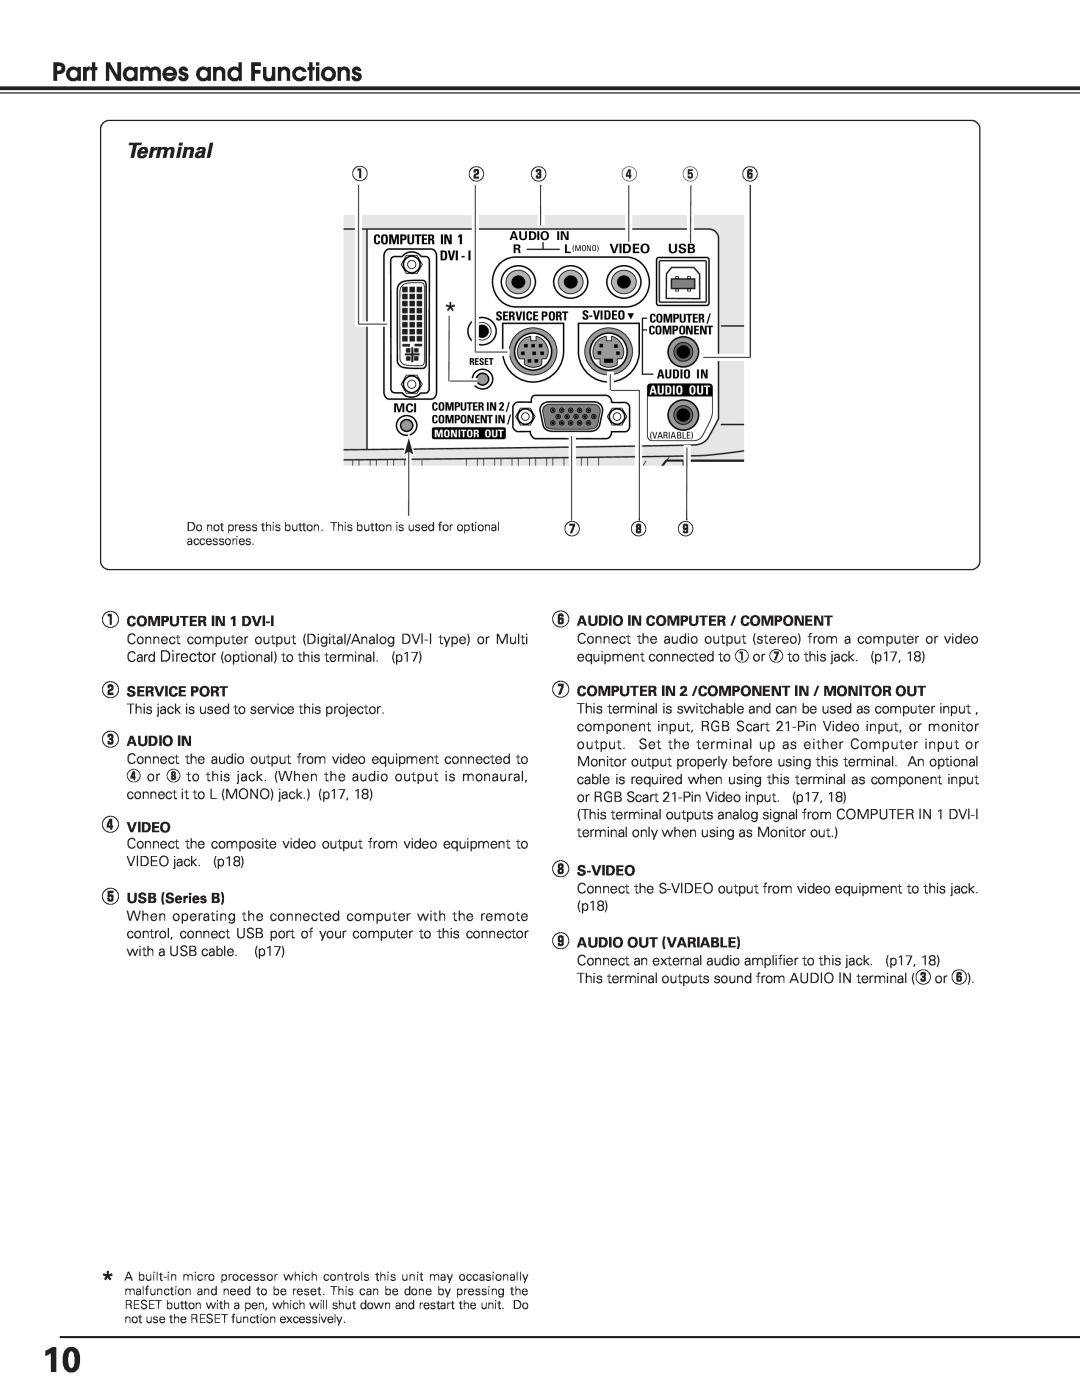 Eiki lc-sb15 owner manual Part Names and Functions, Terminal, This jack is used to service this projector 